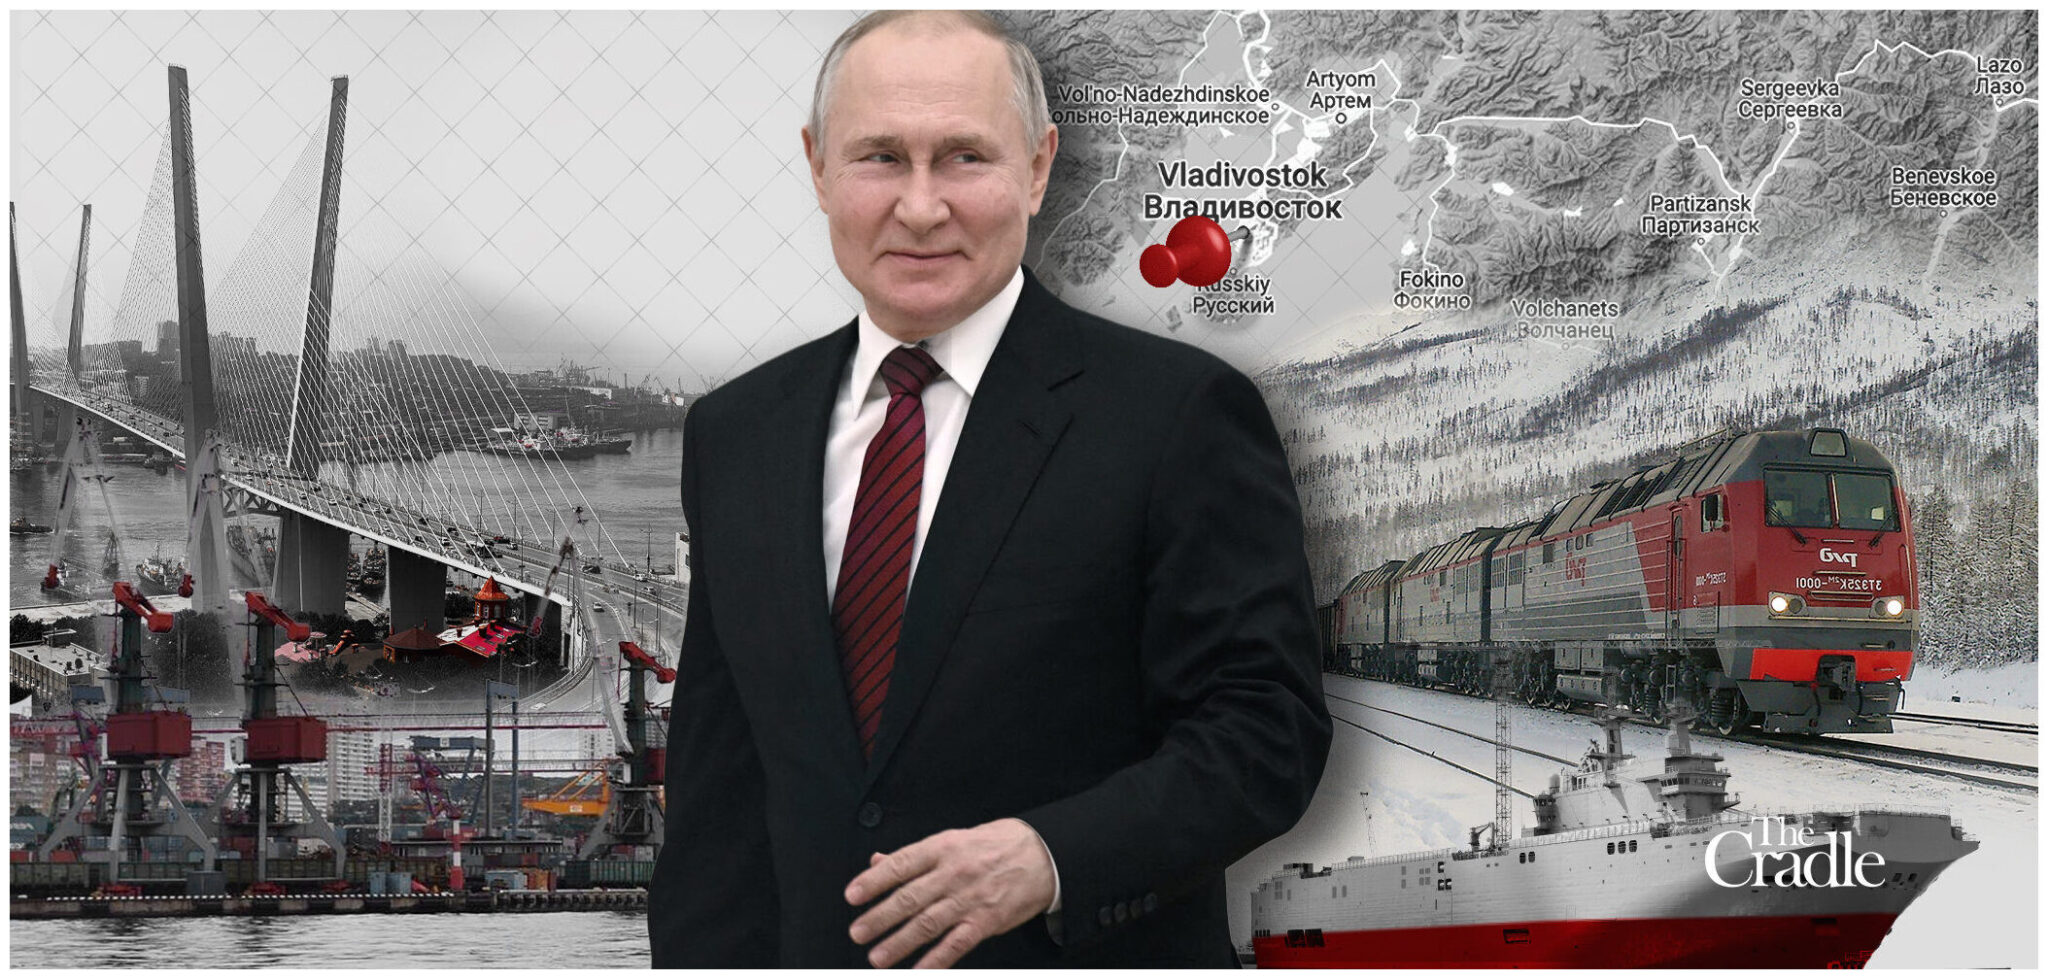 Image with President Vladimir Putin (Center) over various forms of public infrastructure. Photo: the Cradle.